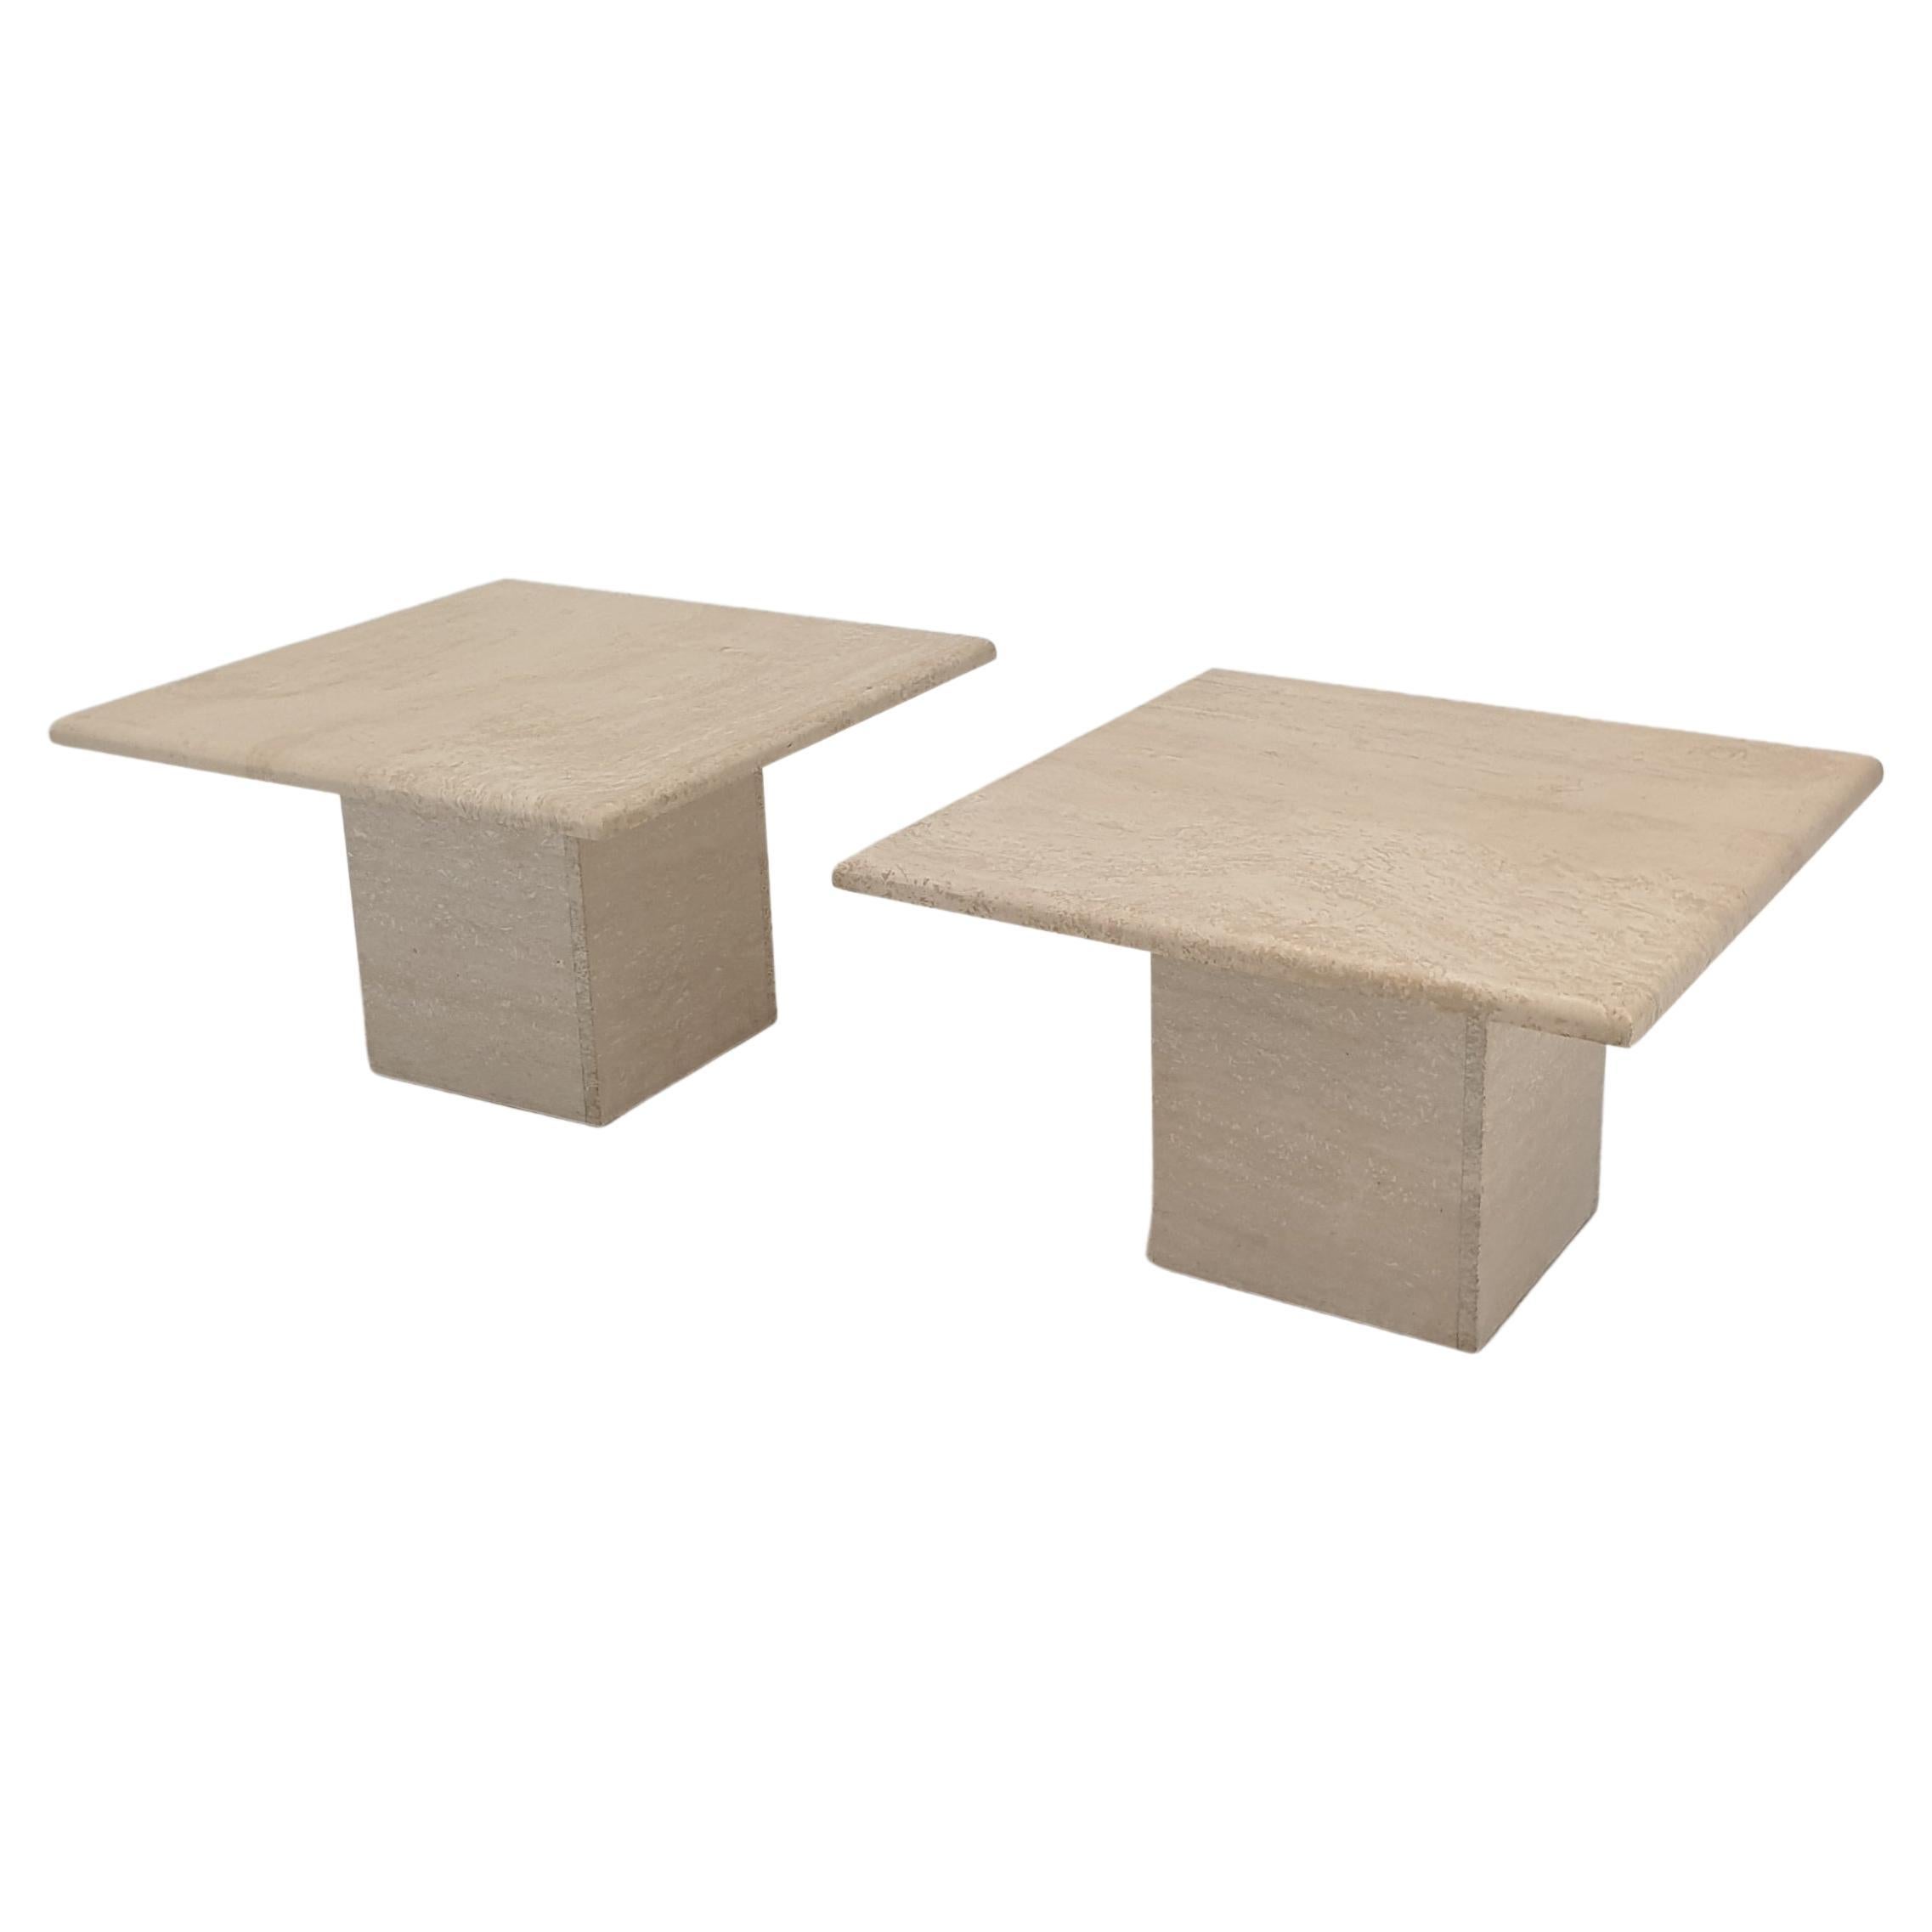 Set of 2 Italian Travertine Coffee or Side Tables, 1980s